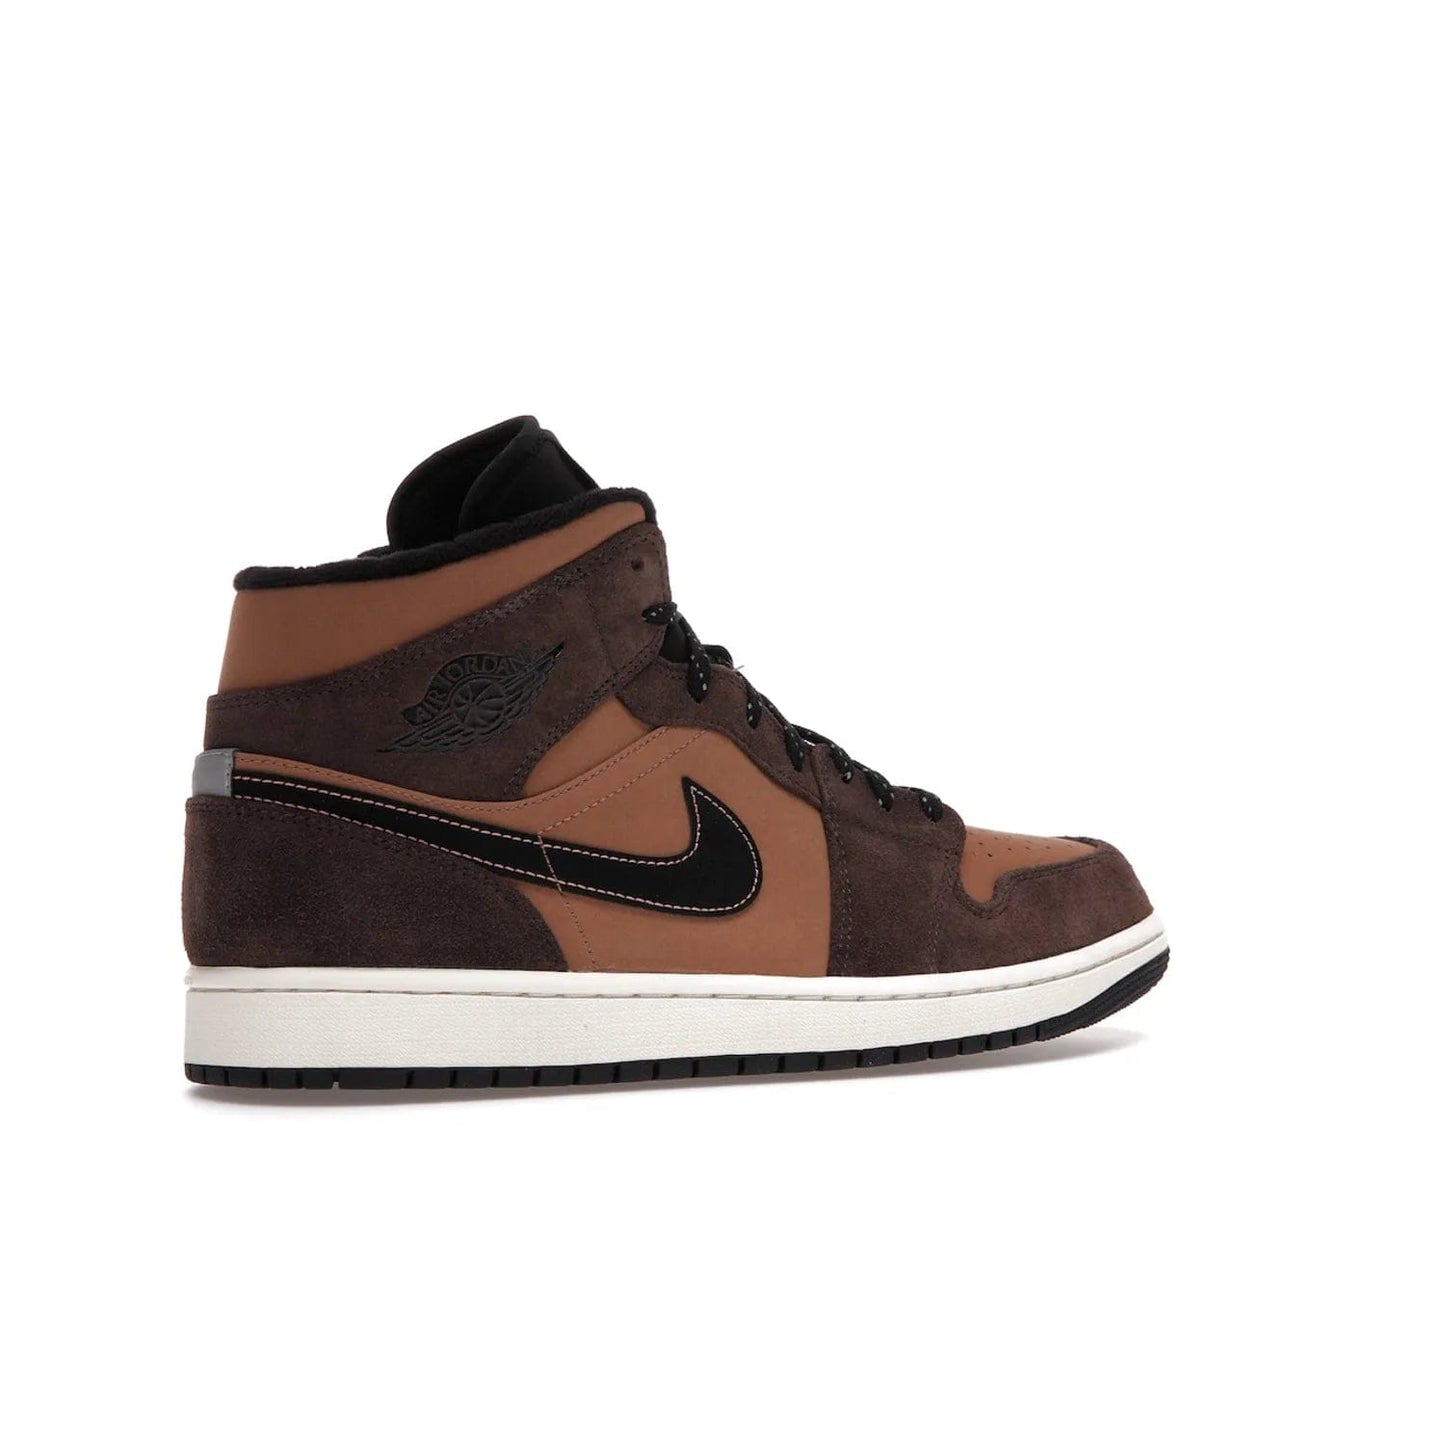 Jordan 1 Mid SE Dark Chocolate - Image 34 - Only at www.BallersClubKickz.com - This fashionable and functional Jordan 1 Mid SE Dark Chocolate features a light brown Durabuck upper, dark brown suede overlays, black Swoosh logos and reflective patch at heel. A must-have for any sneakerhead!